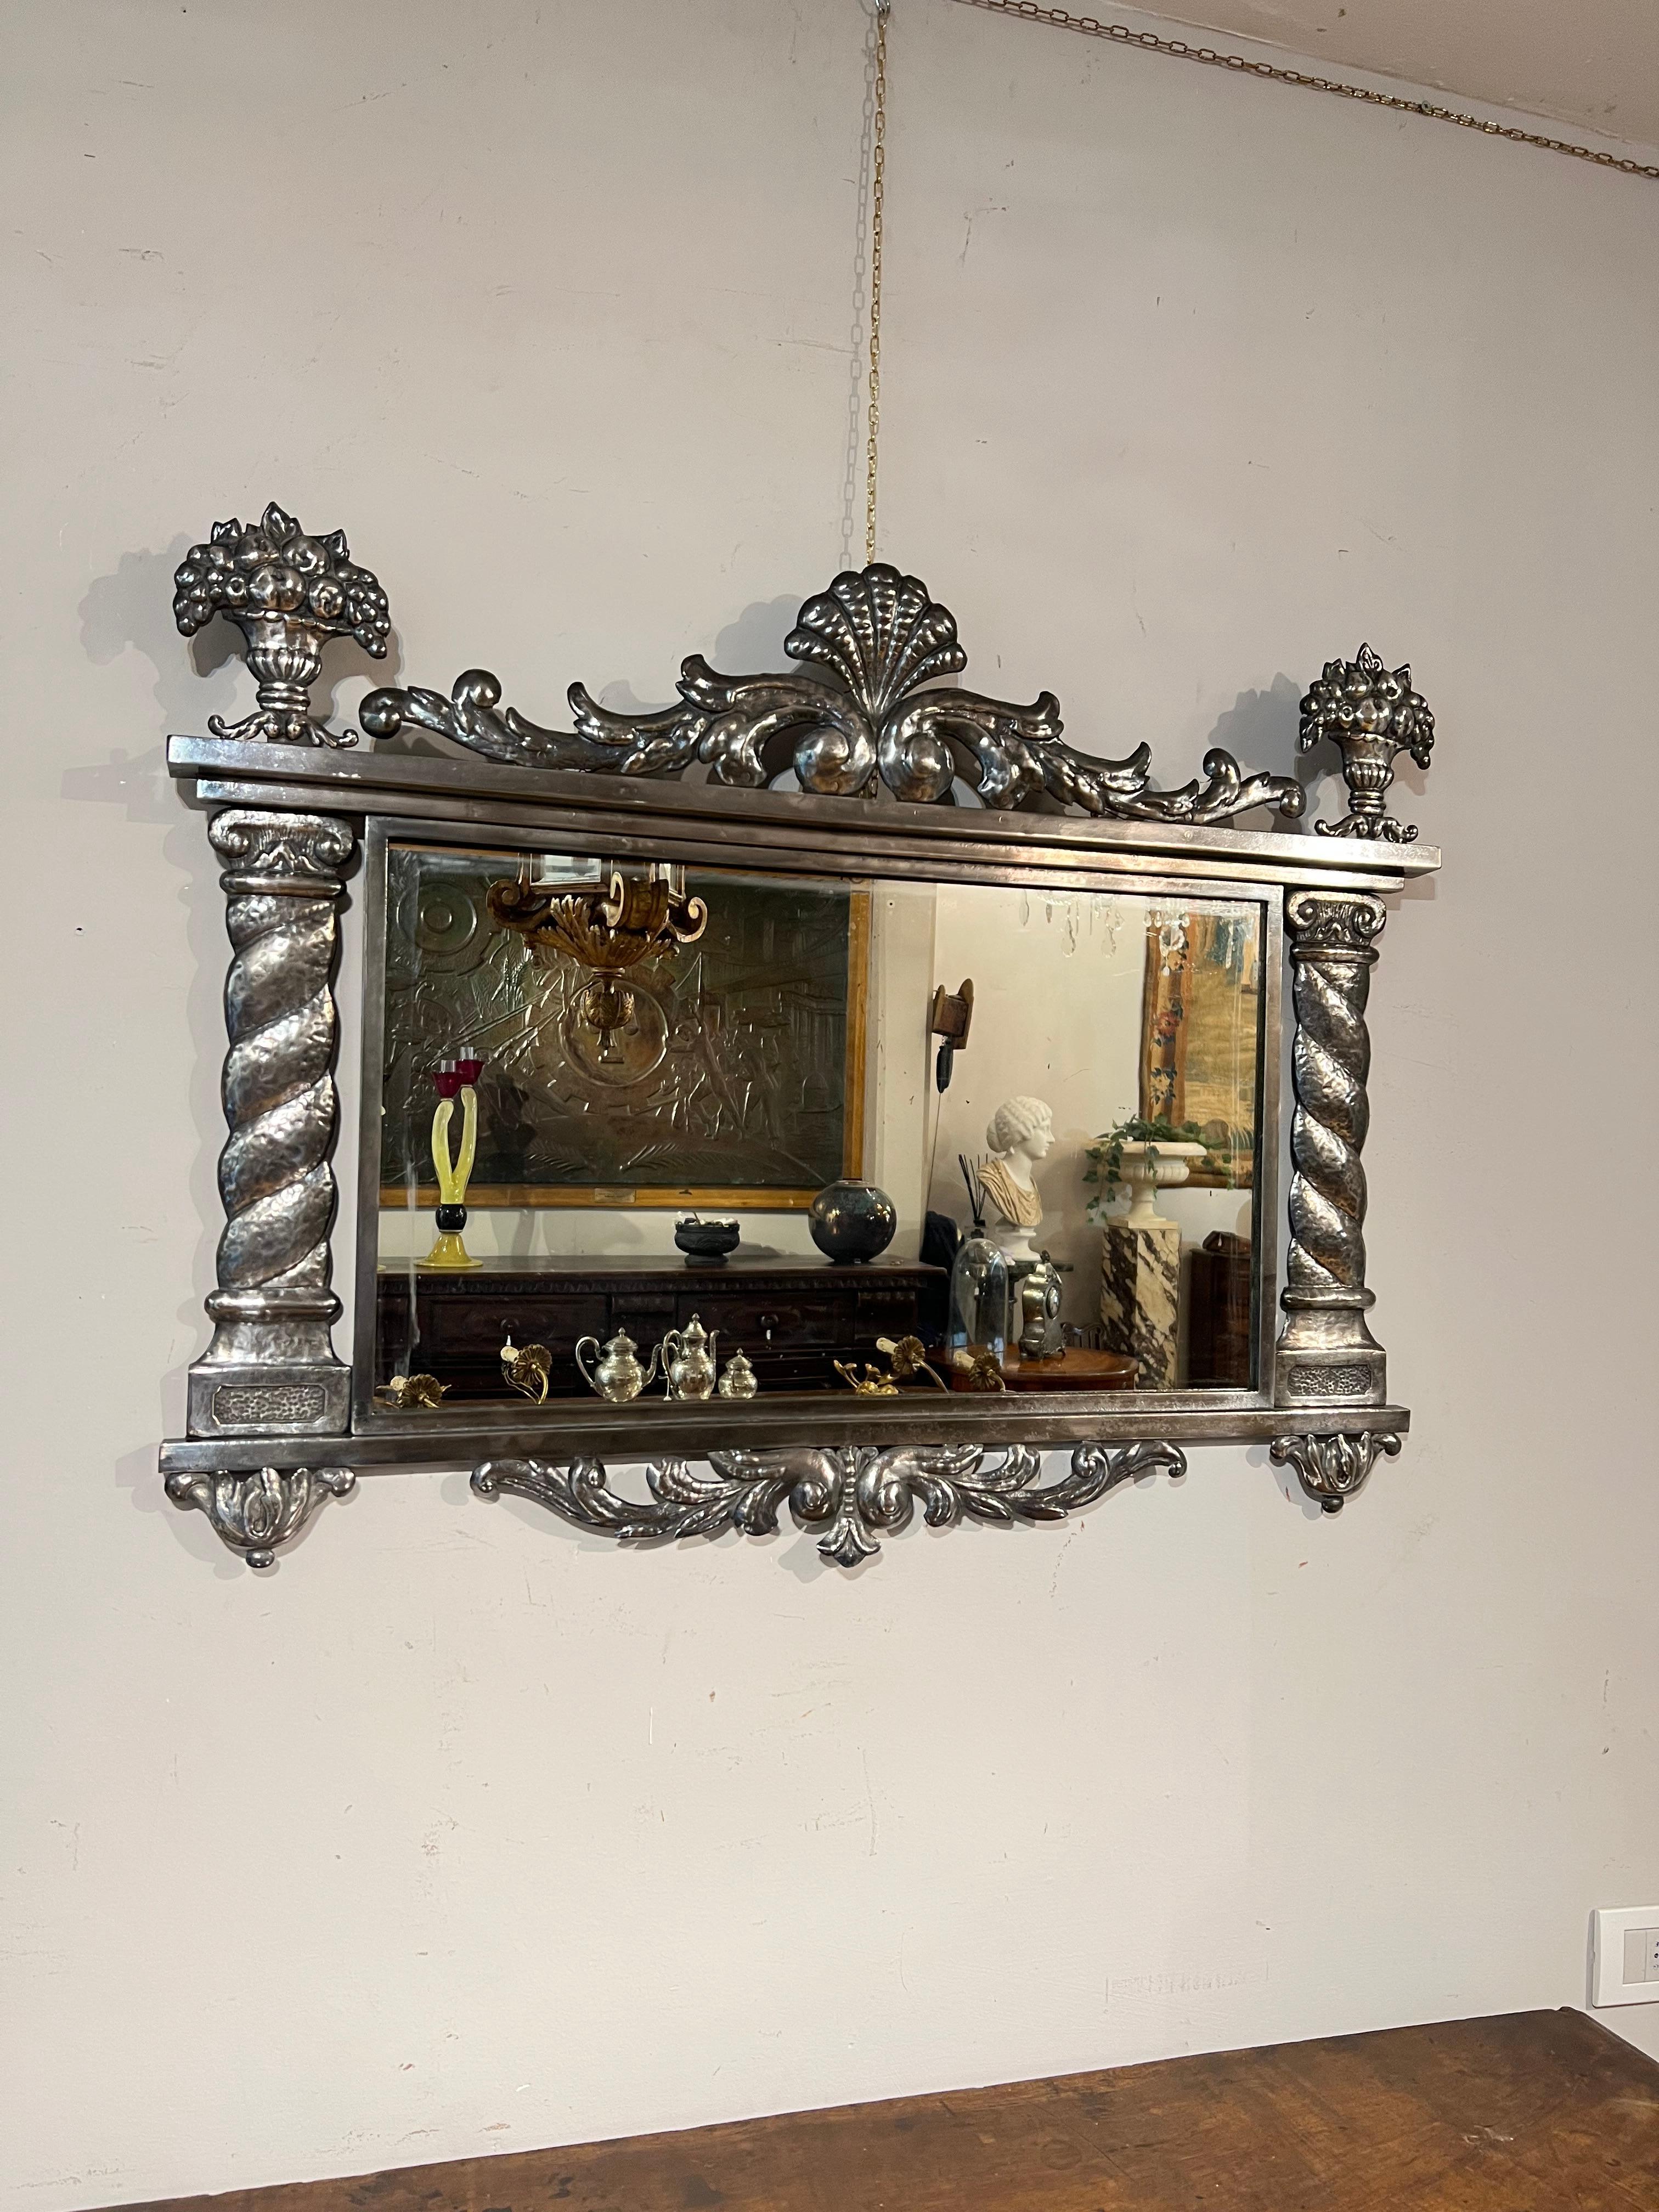 Beautiful mirror in silvered metal, Italian manufacture from the beginning of the 19th century.
Cymace centered by a shell motif, sides made as two twisted columns ending in a basket of flowers.

MEASUREMENTS: 73x95 cm